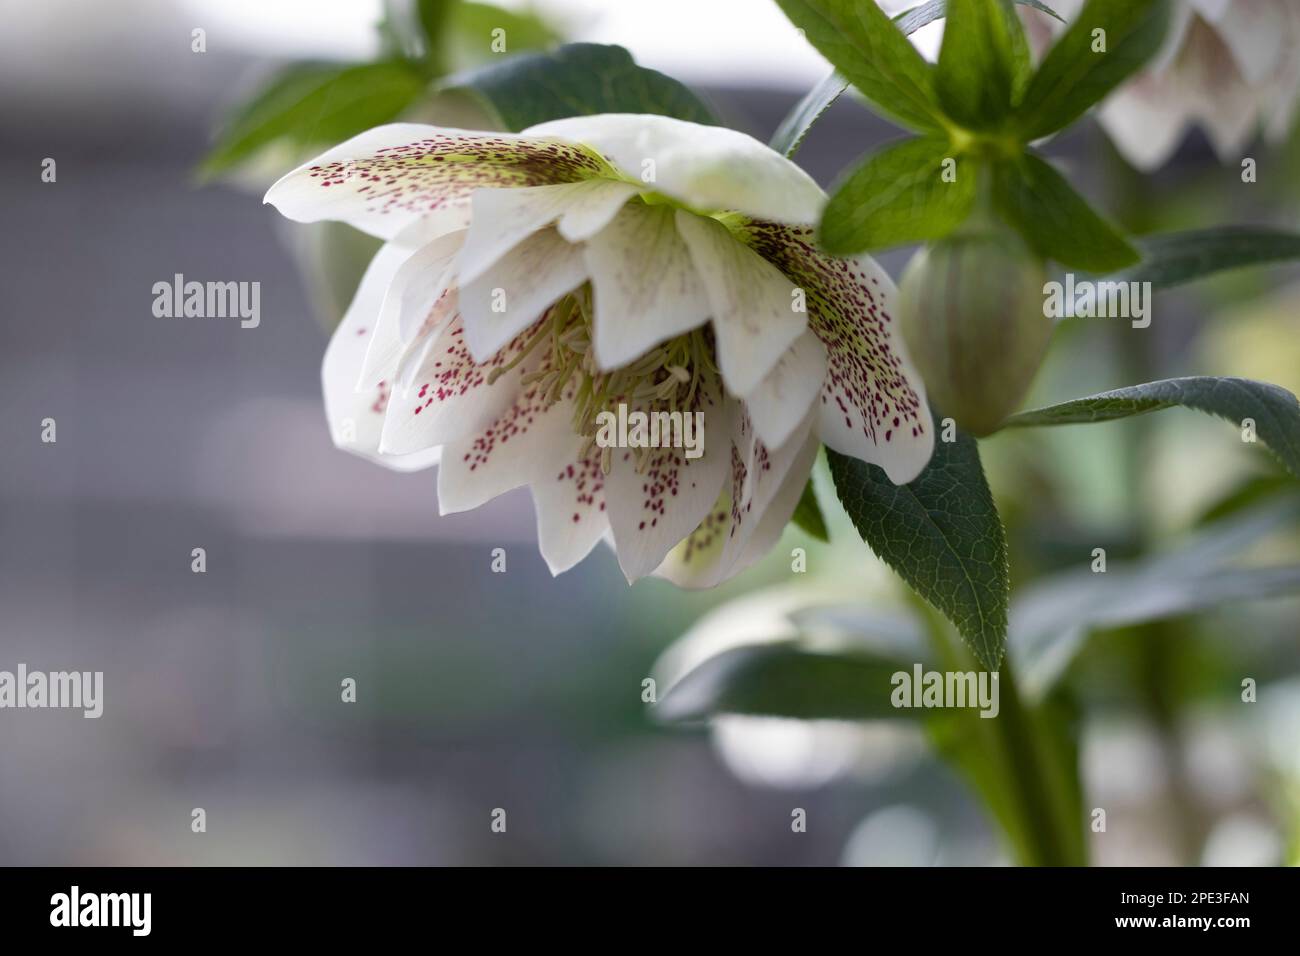 The beautiful spotted white flower of Helleborus orientalis Cinderella in close up. Graceful winter flowering plant with copyspace bottom left. Stock Photo